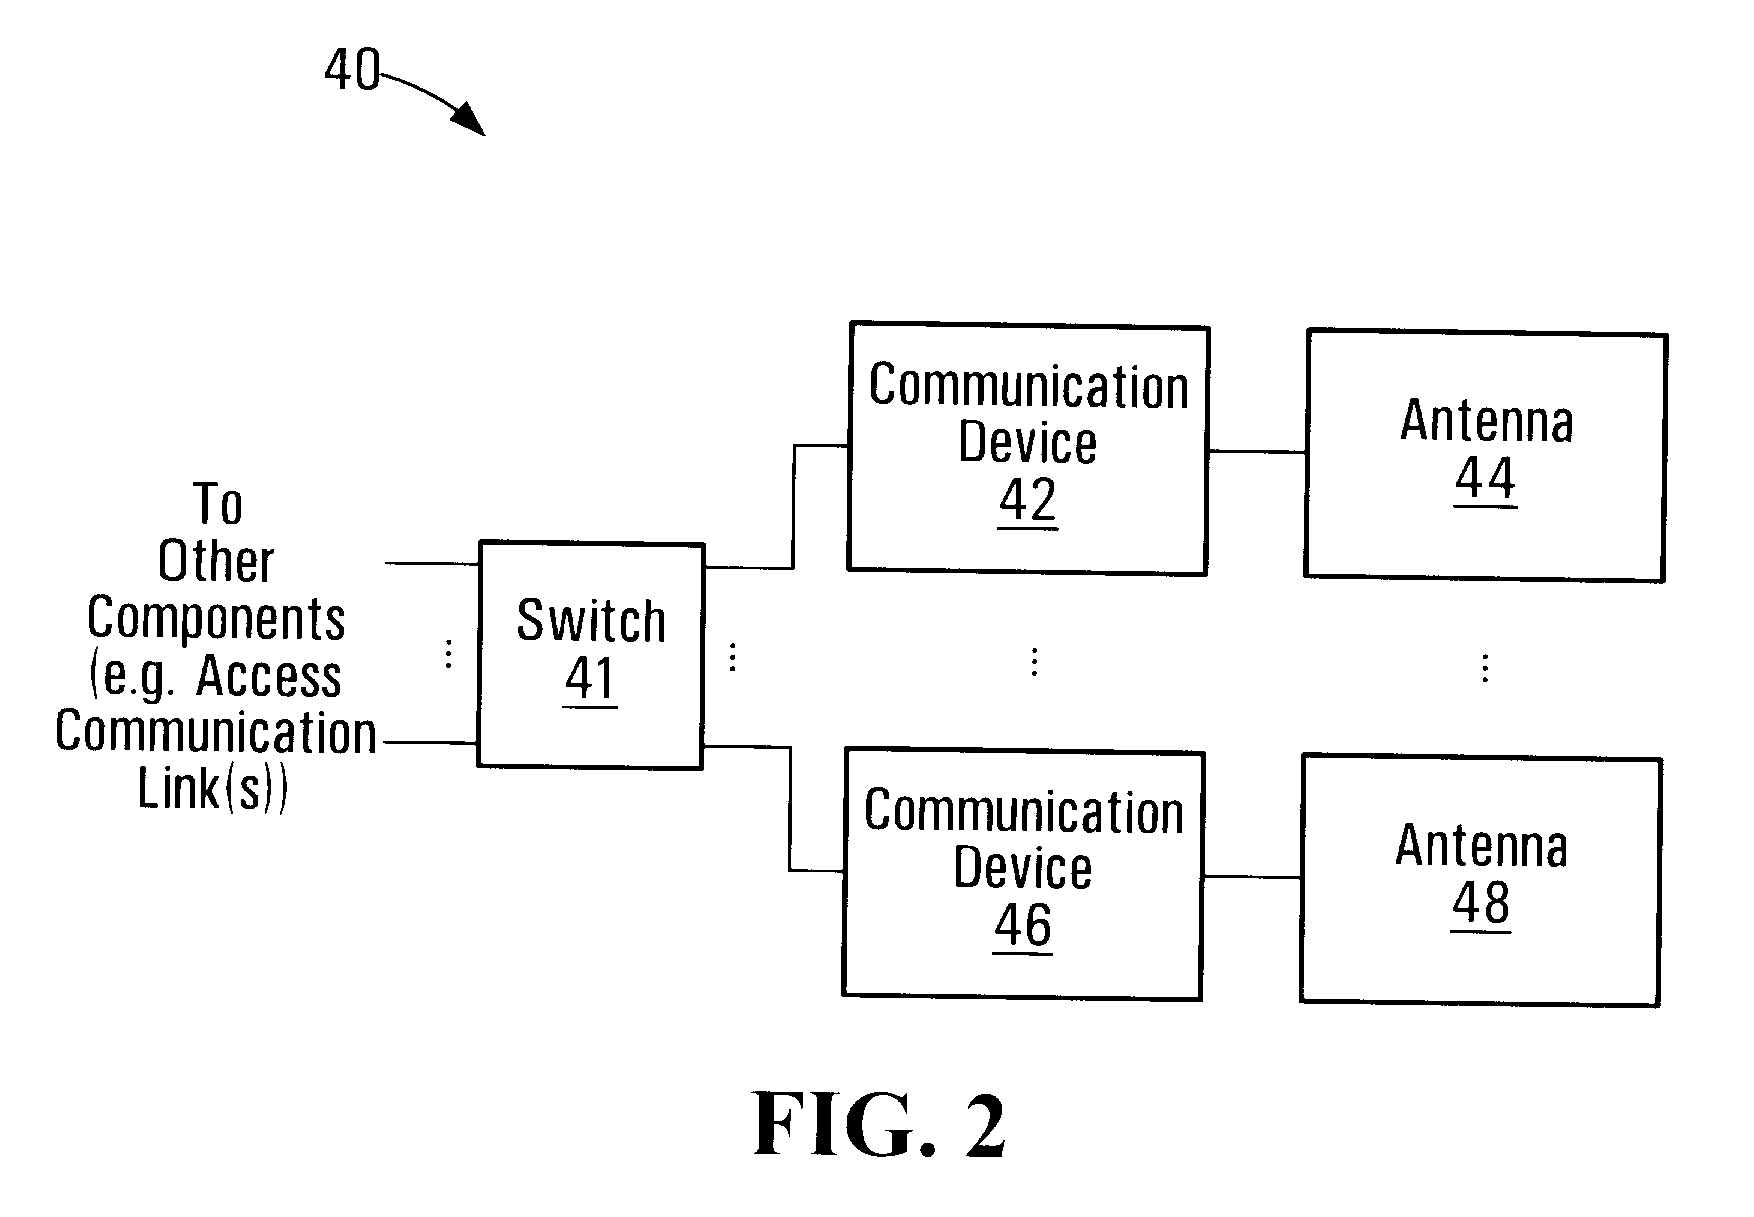 Wireless network communication apparatus, methods, and integrated antenna structures